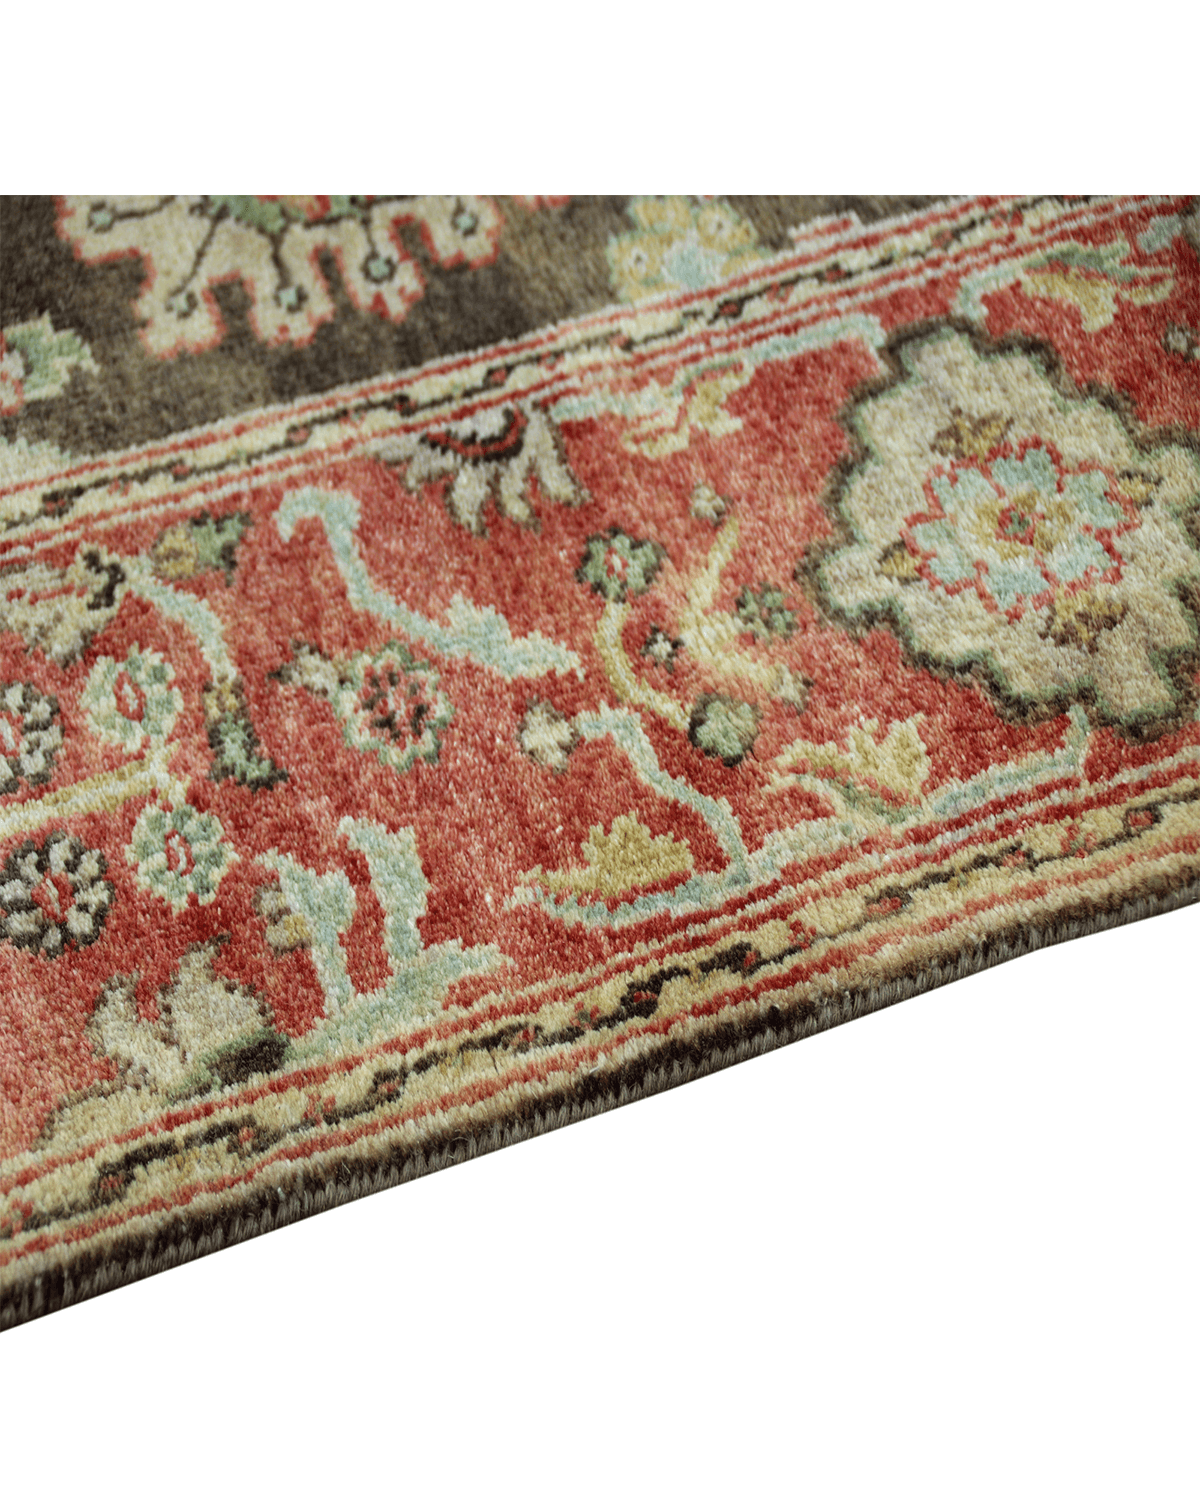 Traditional Hand-knotted Rug (MJ-48)